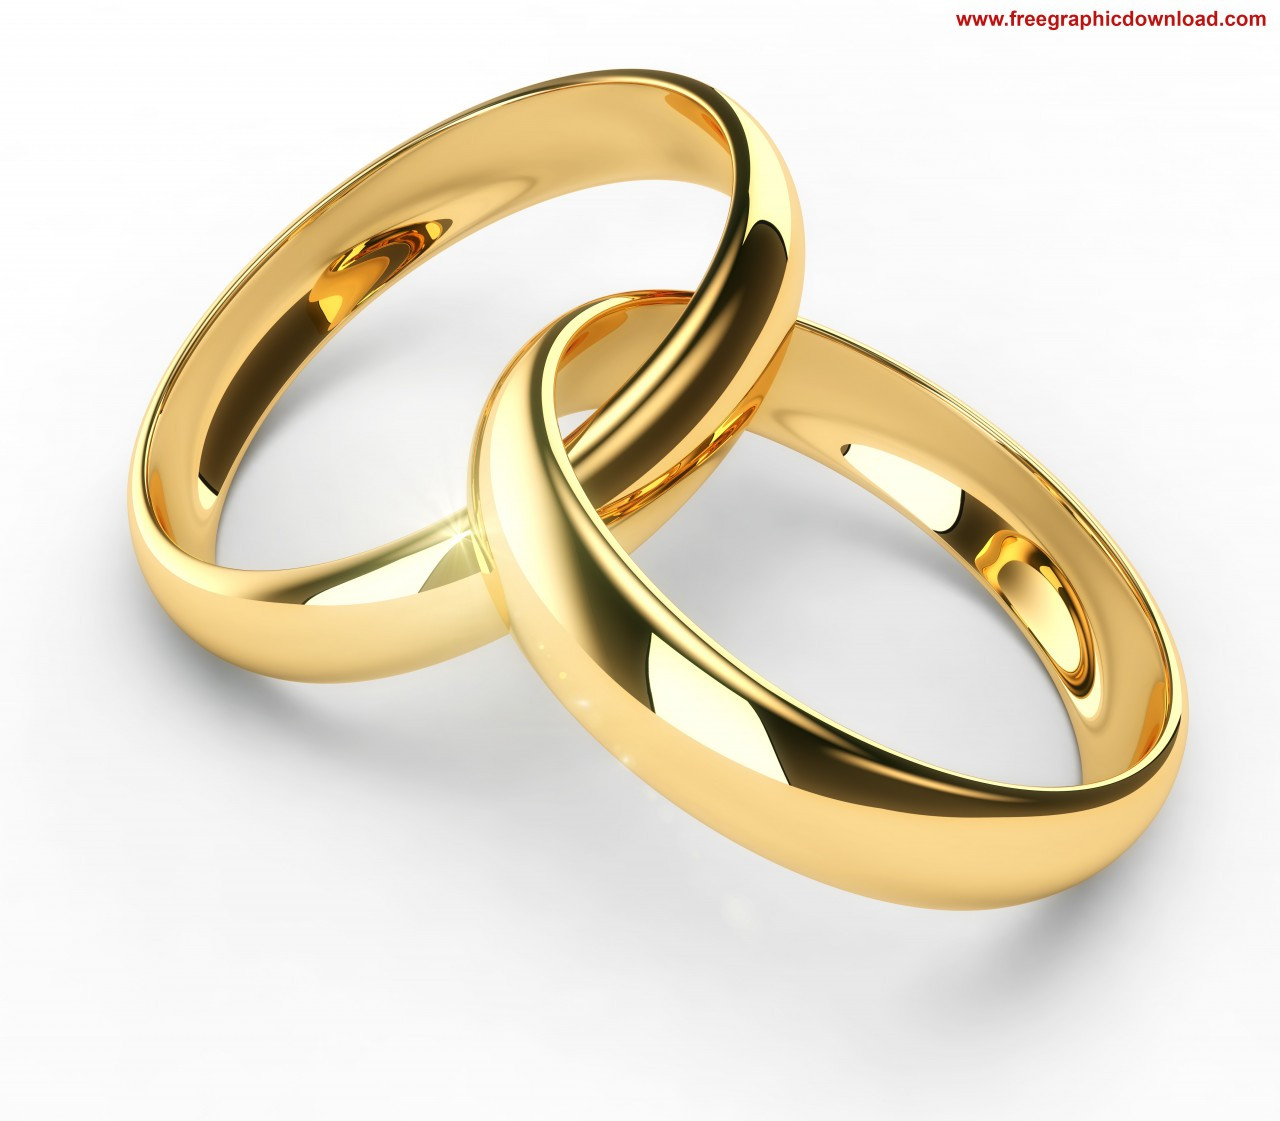 Picture Of Wedding Rings
 Ring Manipulation Superpower Wiki